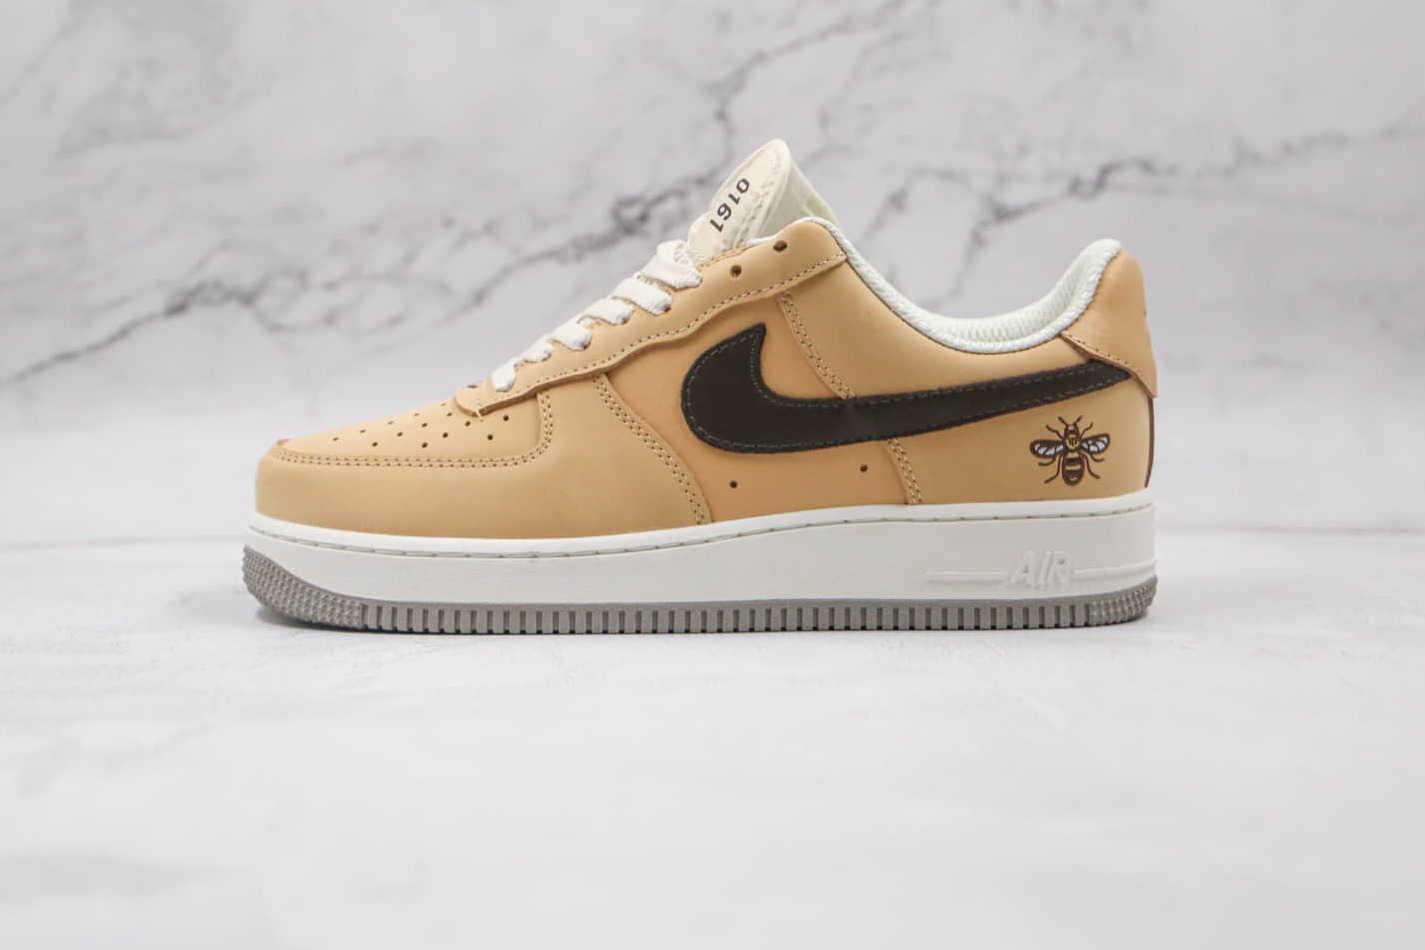 Nike Air Force 1 Low 'Manchester Bee' DC1939-200 - Limited Edition Sneakers